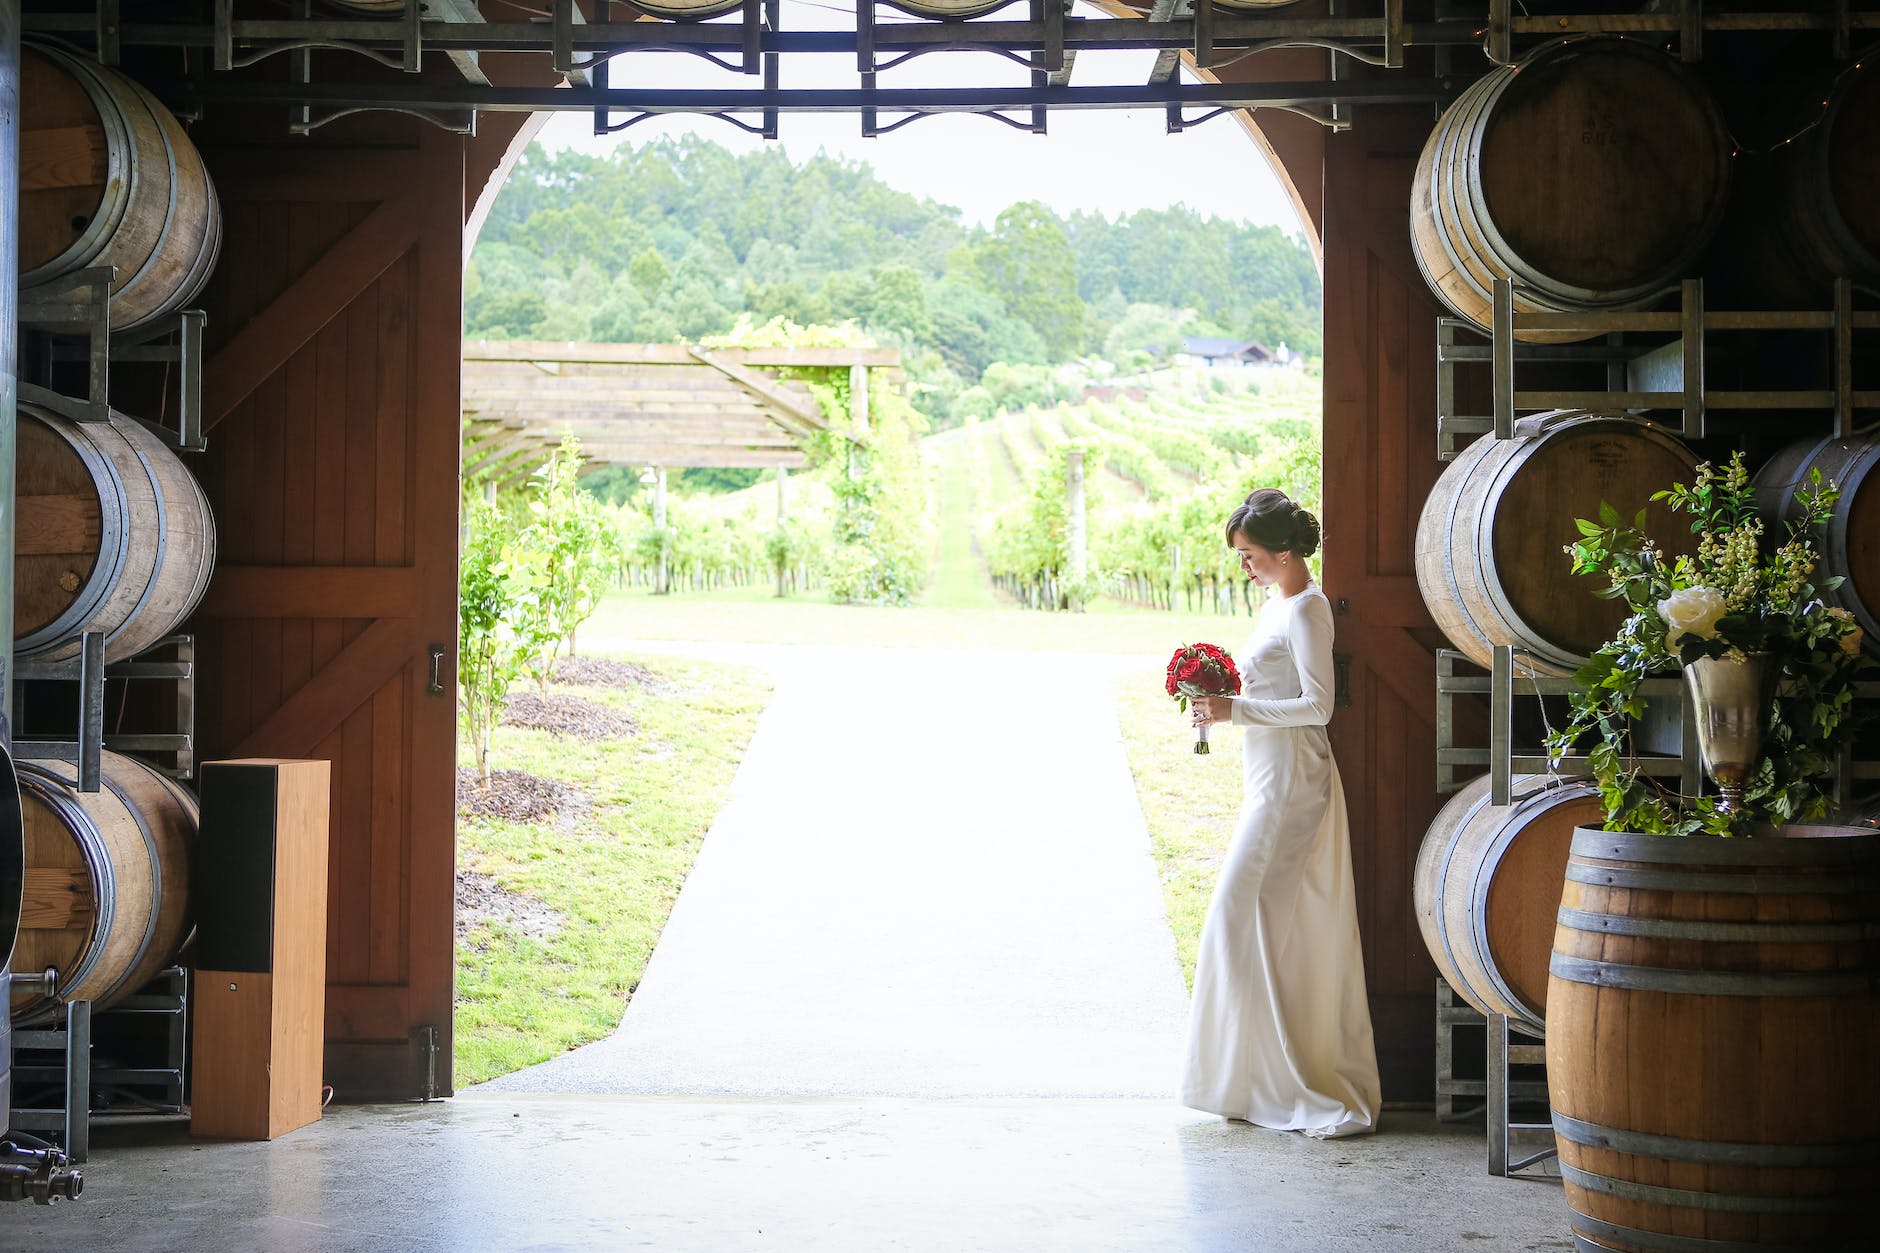 bride with bouquet near winery with barrels and field with various grapes